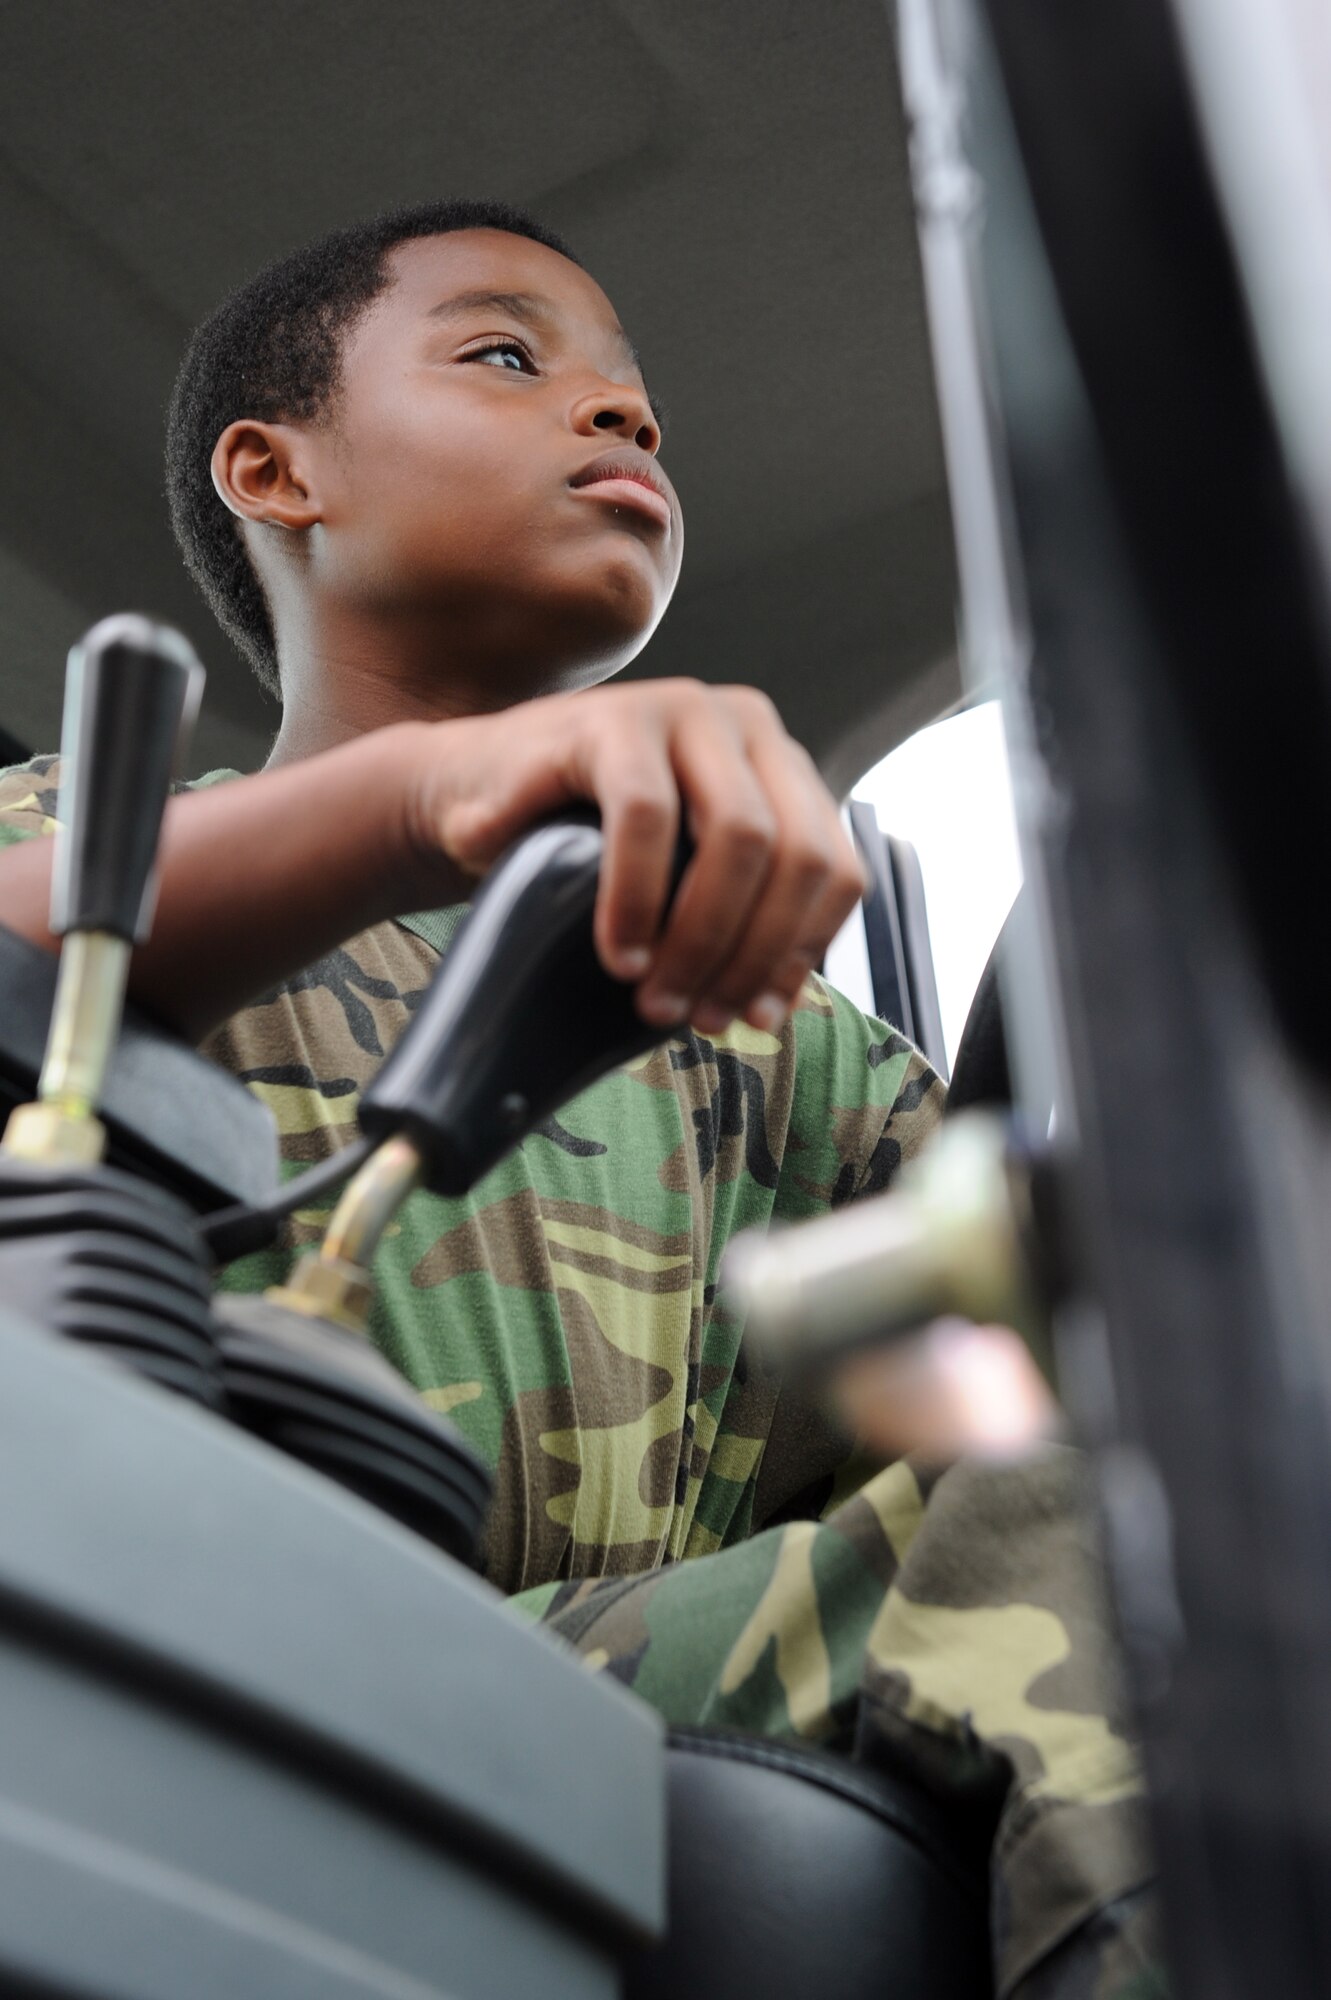 JOINT BASE MCGUIRE-DIX-LAKEHURST, N.J. -- Brandon Reid, sixth-grade student at Jonas Salk Middle School starts the engine of a 10K all-terrain forklift during a tour here June 9.  The 621st Contingency Response Wing's 818th Global Mobility Squadron invited 16 special education students from Jonas Salk Middle School in Old Bridge, N.J. to visit the base for a tour of aircraft, facilities and equipment. (U.S. Air Force photo by Tech. Sgt. Laura K. Deckman)(released)